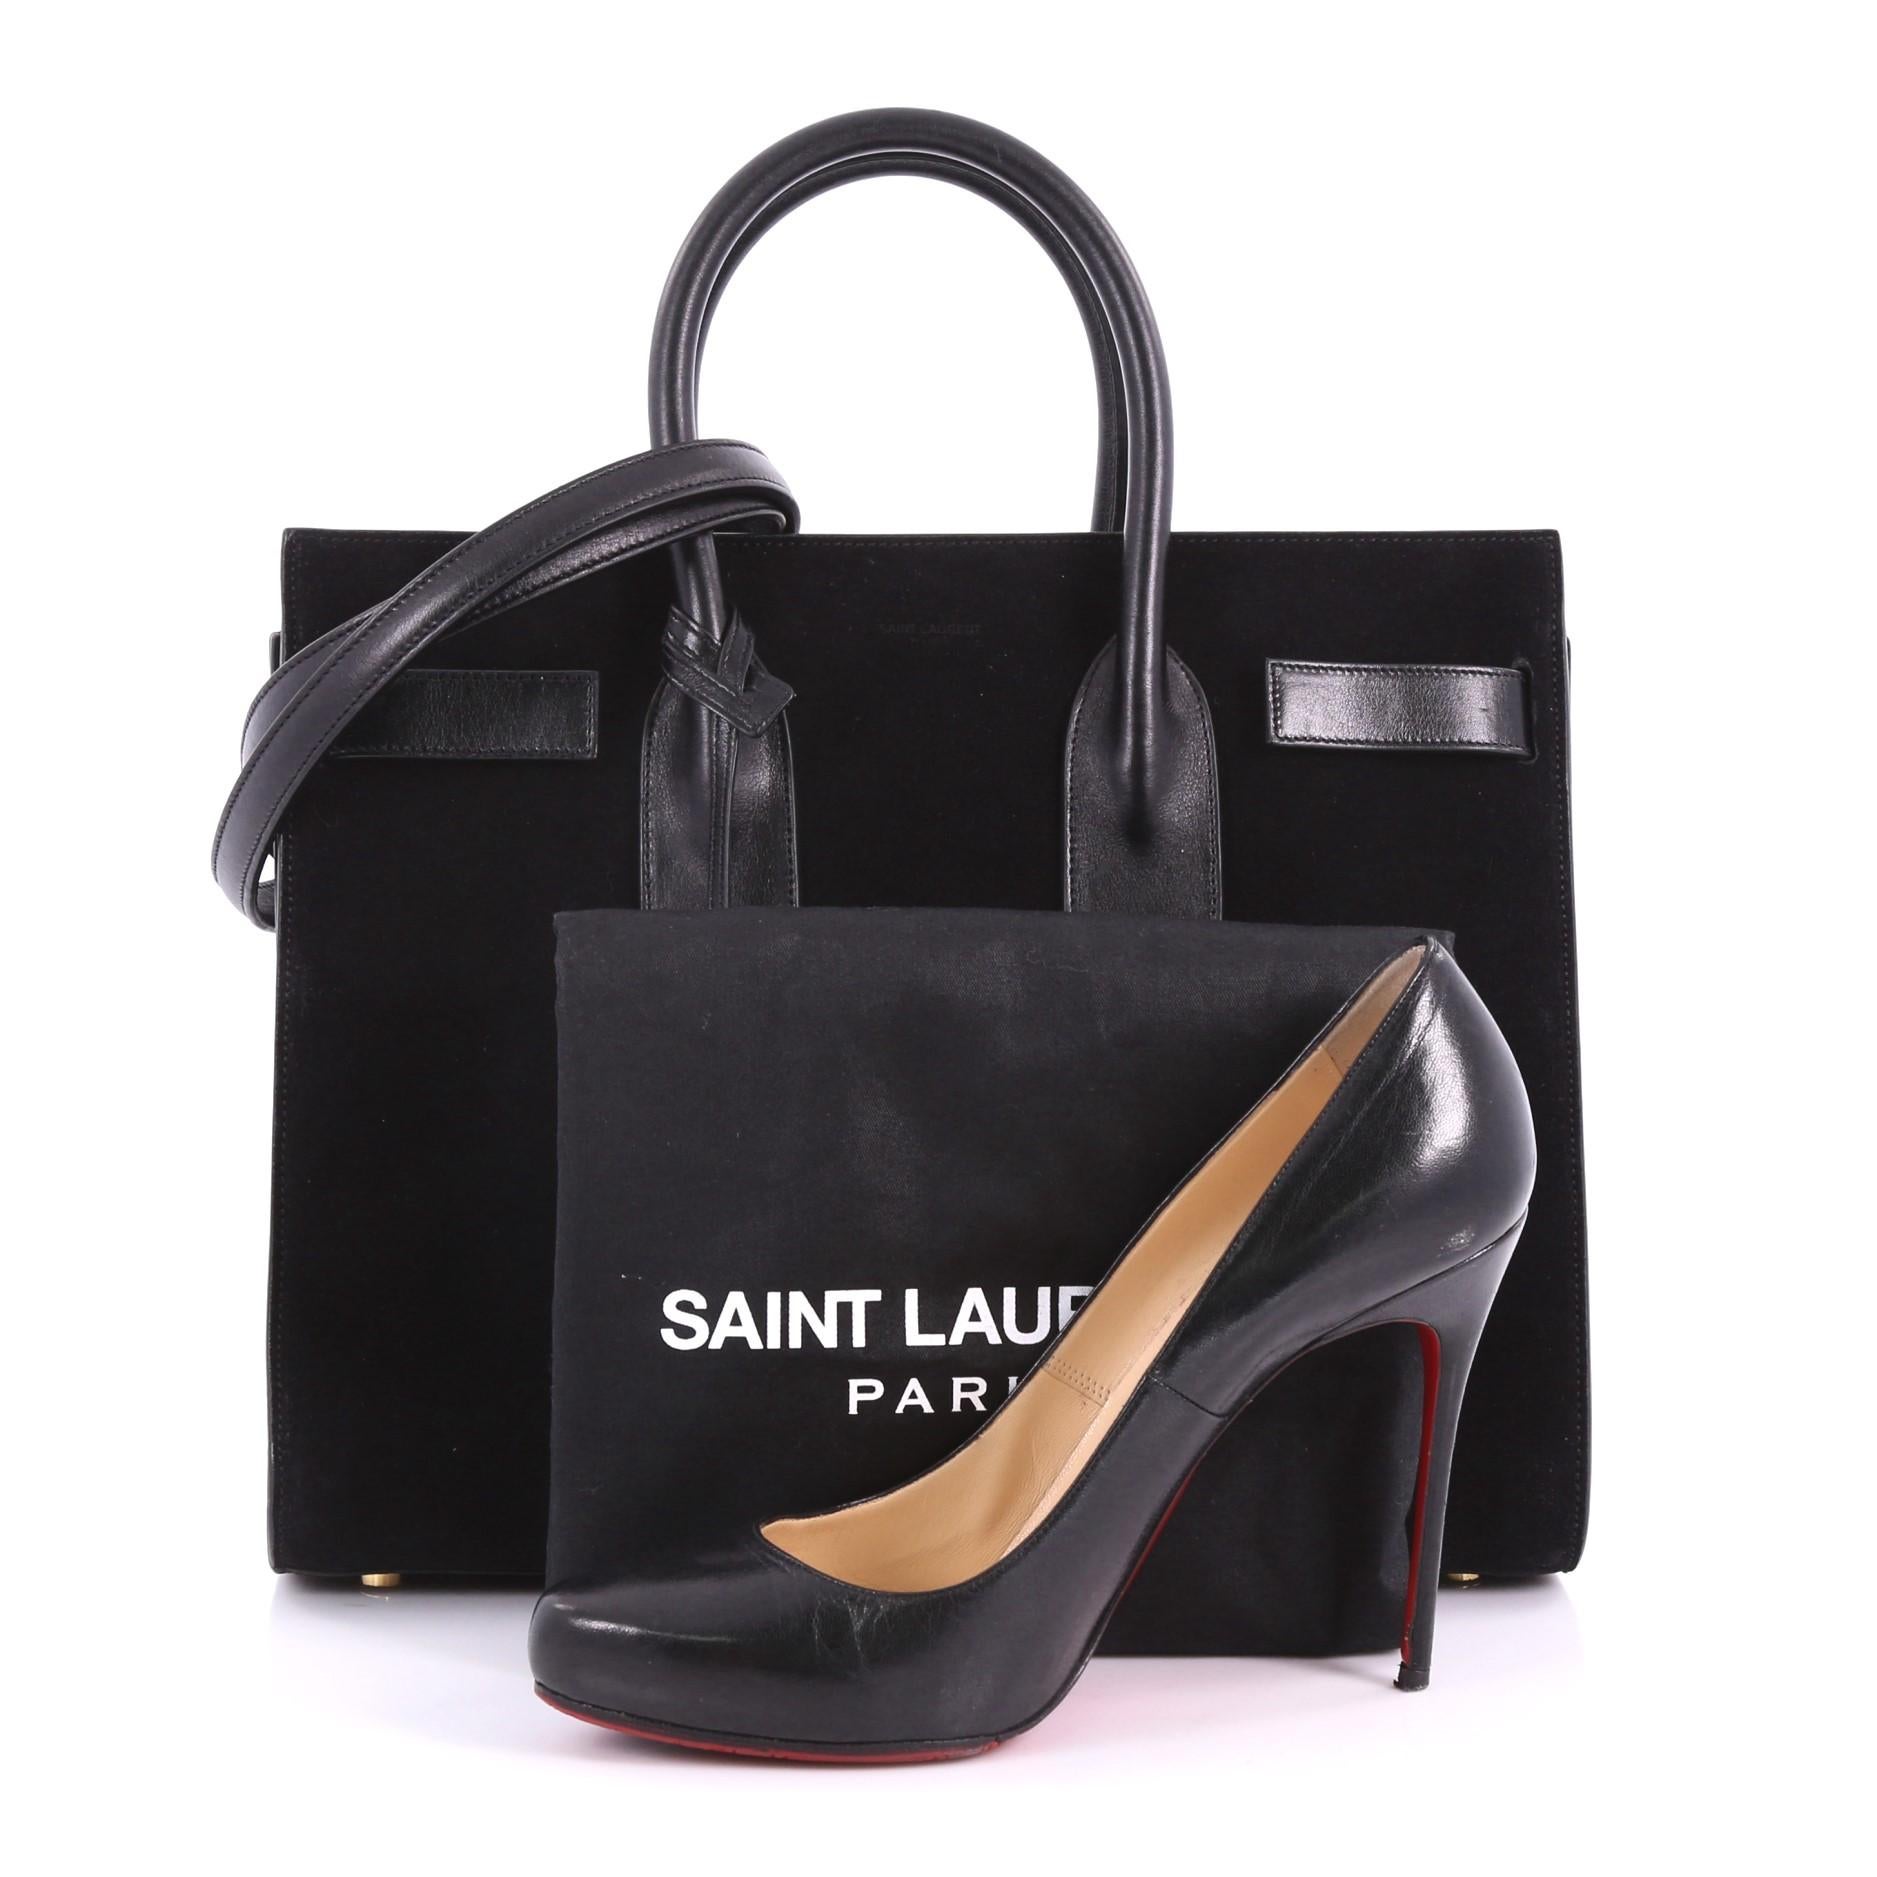 This Saint Laurent Sac de Jour NM Handbag Suede Small, crafted from black suede, features dual-rolled leather handles, protective base studs, and gold-tone hardware accents. Its leather tabs open to a black leather interior. **Note: Shoe